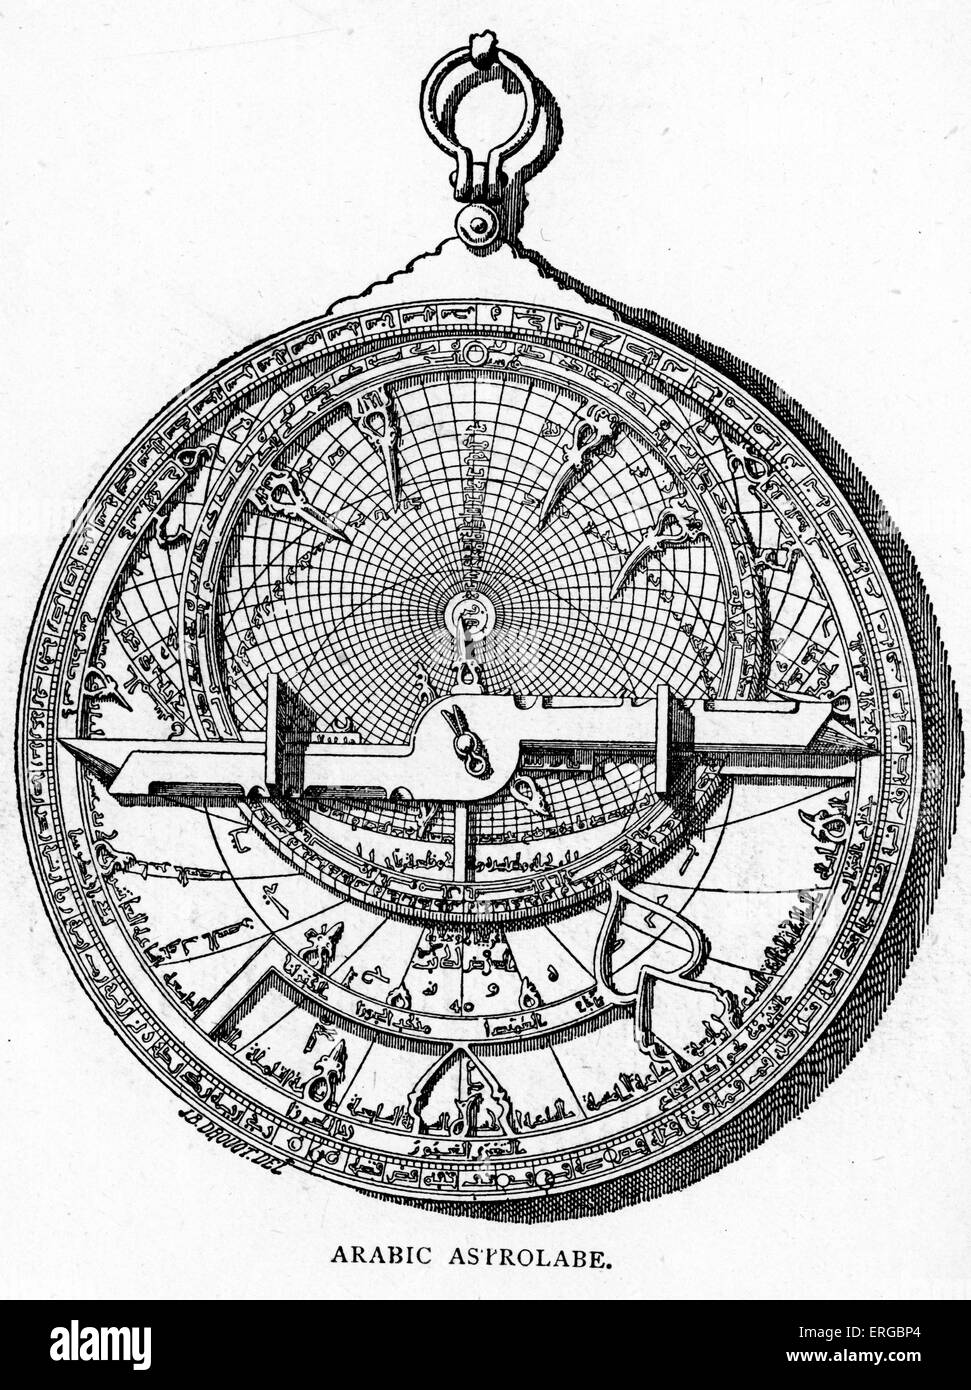 Arabic Astrolabe. Instrument  historically used by astronomers and  navigators to locate  the positions of the Sun, Moon, Stock Photo